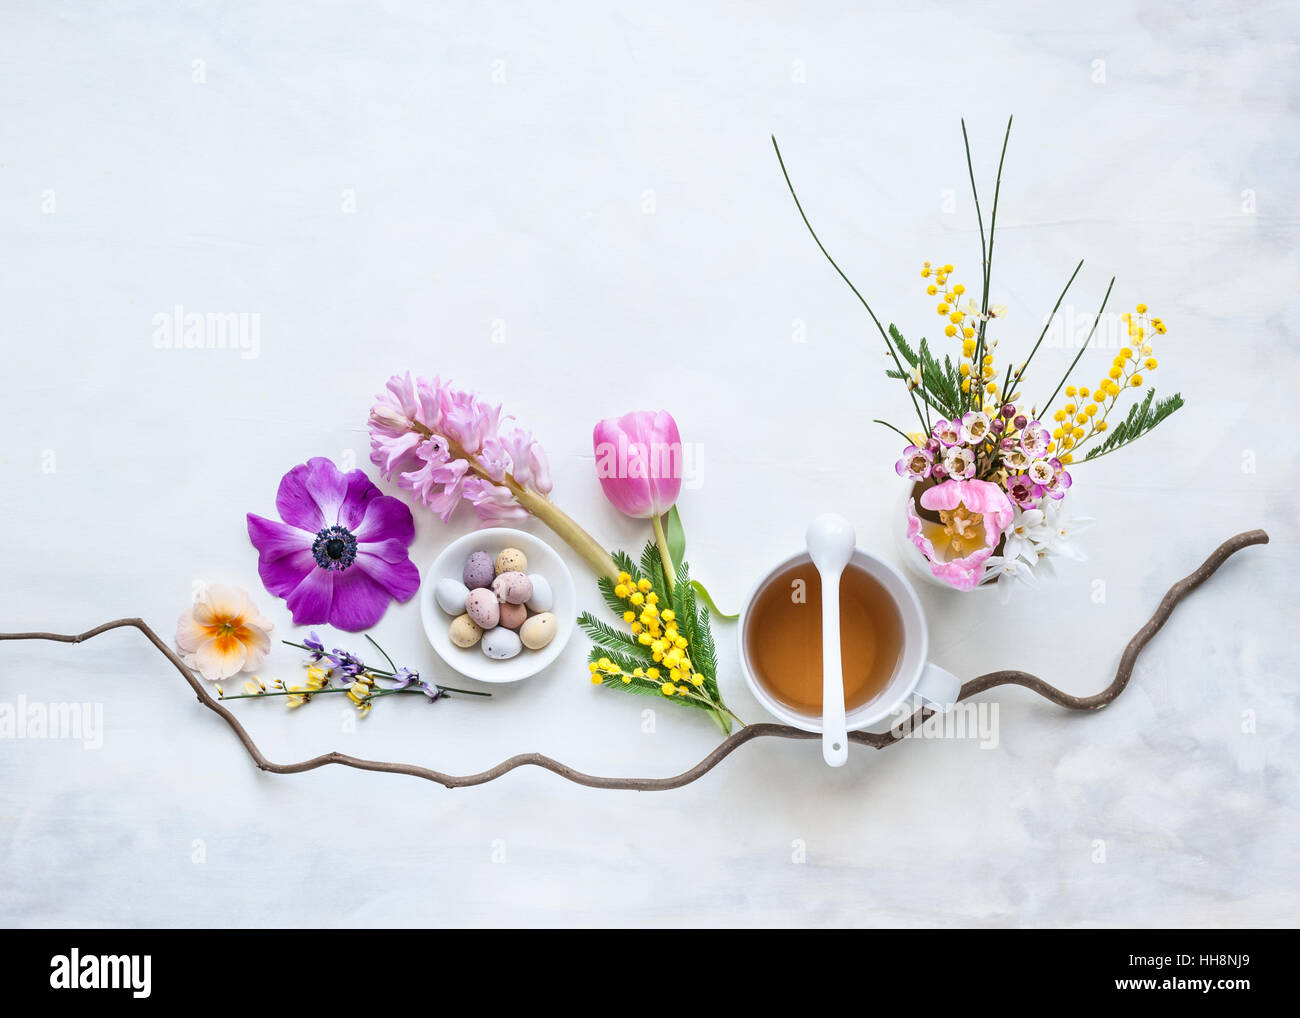 flat lay with spring flowers laid out on white and gray painted backdrop in natural light Stock Photo